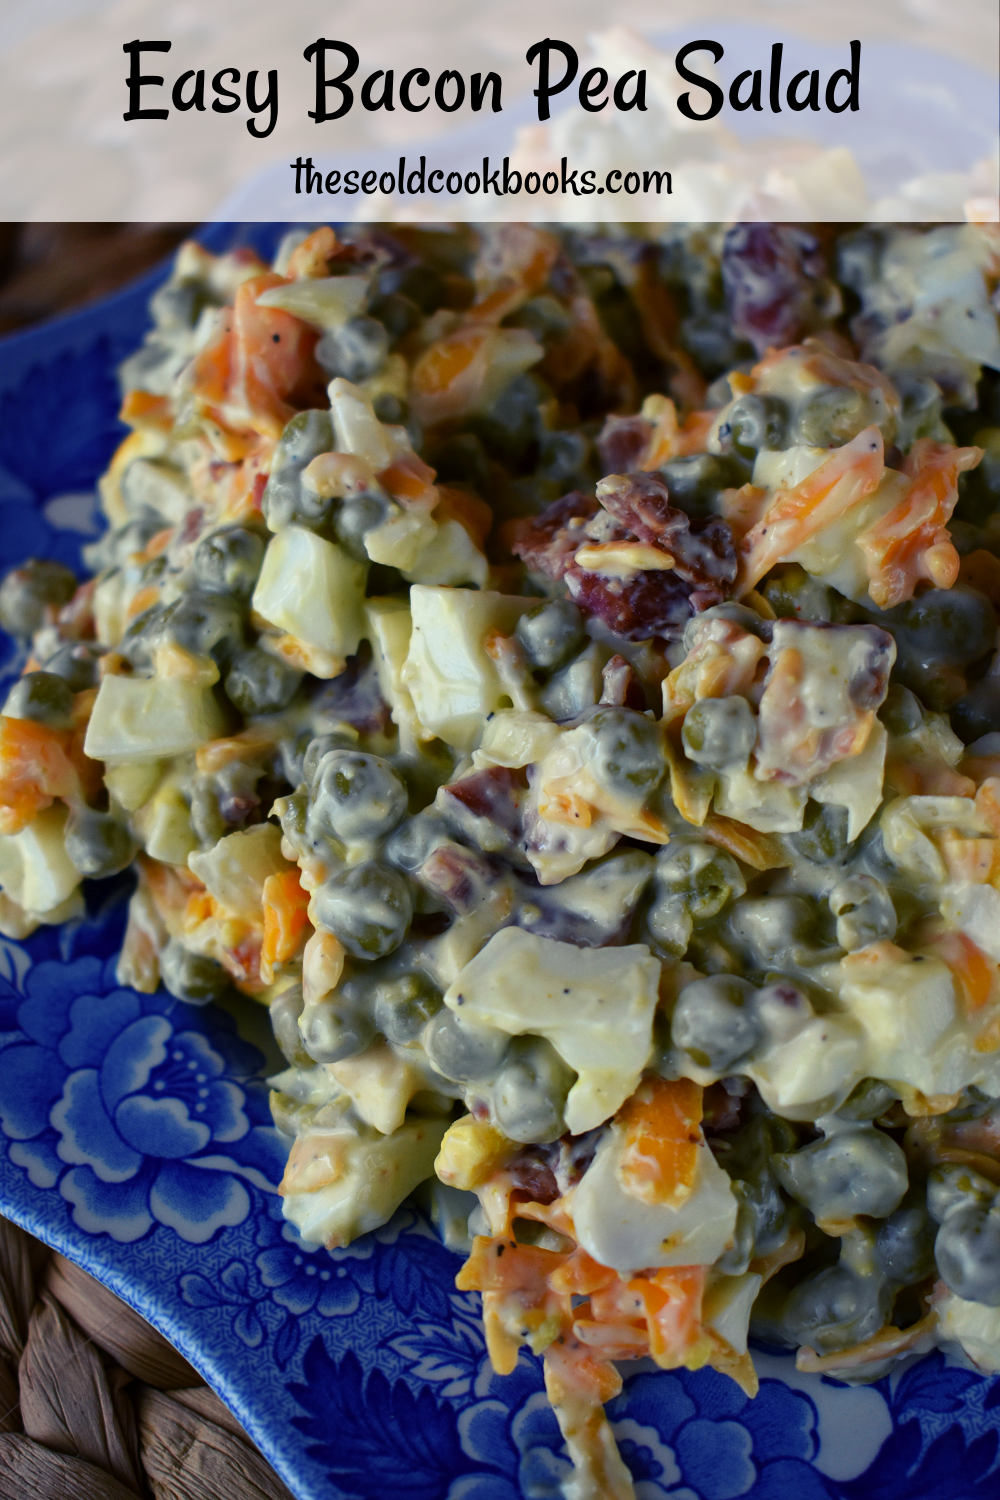 Easy Bacon Pea Salad is absolute perfection. The simple mixture of peas, bacon, shredded cheddar cheese, hard boiled eggs and mayonnaise marries together into the perfect summertime salad fit for any picnic or family get-together.